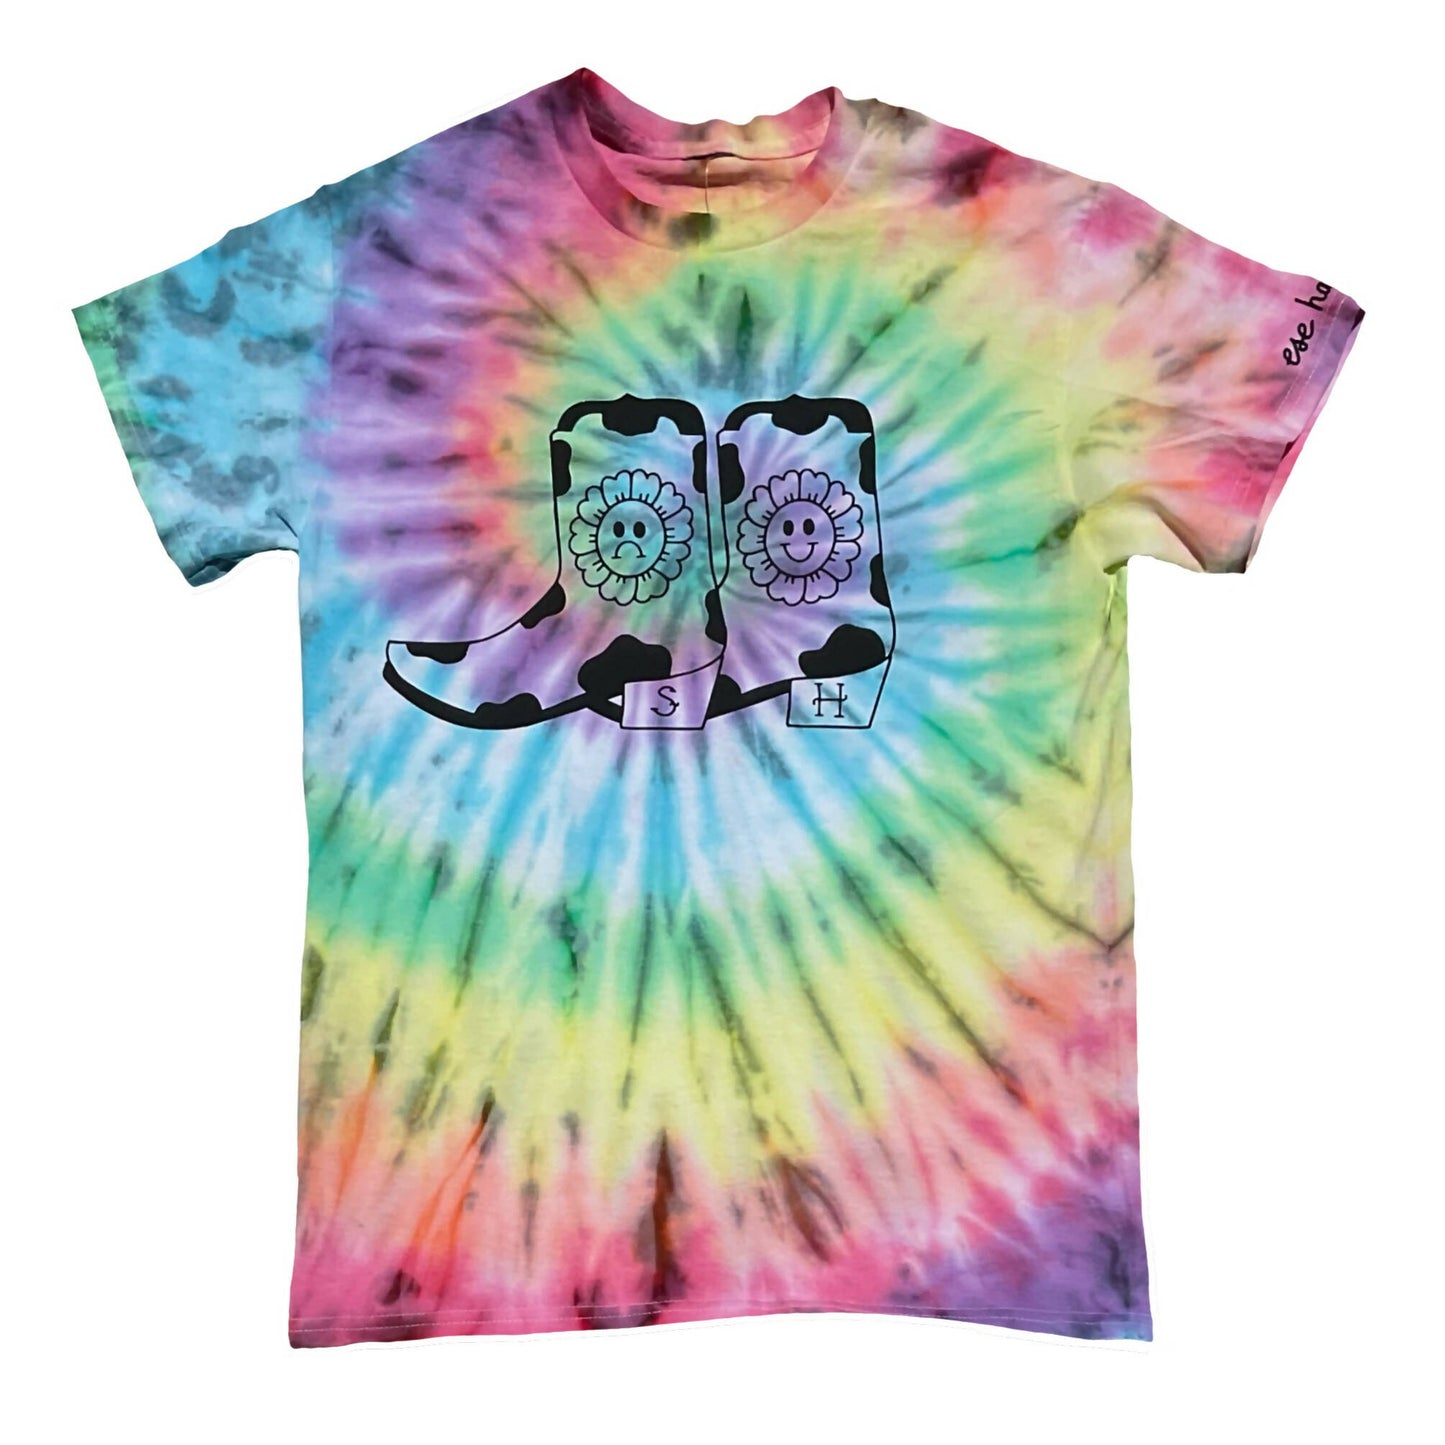 Rainbow Tie Dye Shirt with Boots